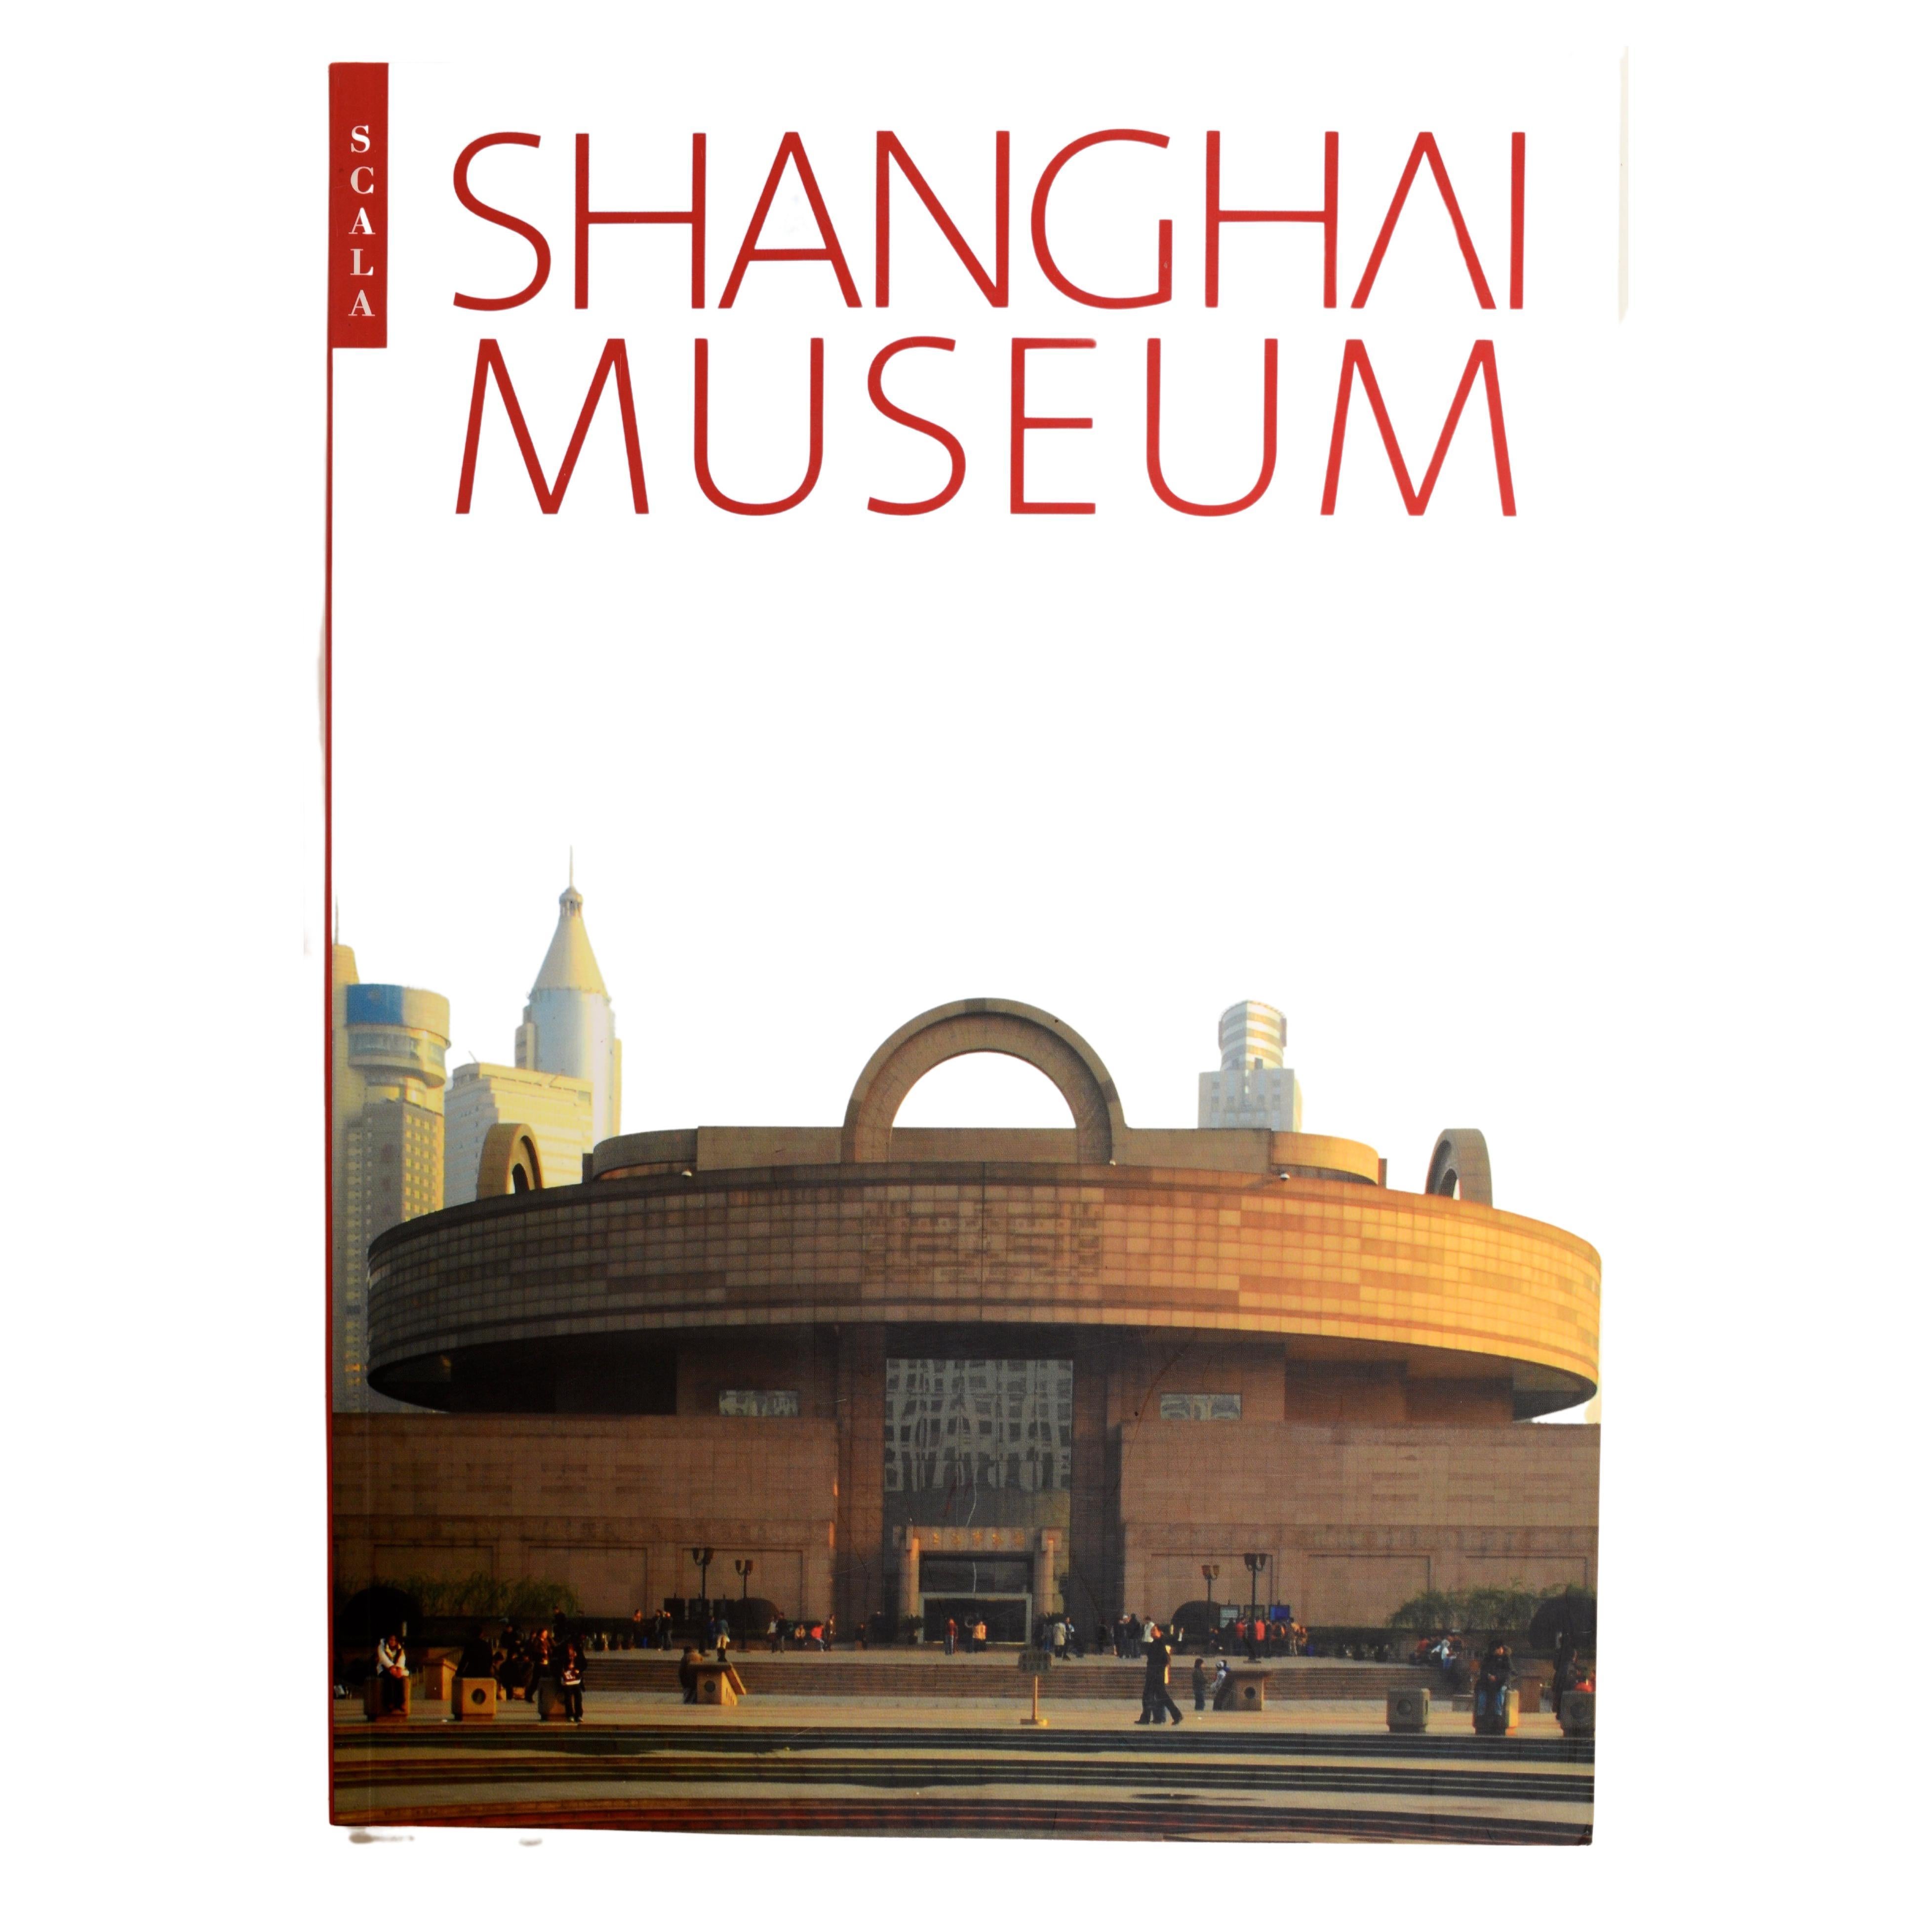 The Shanghai Museum by The Curators of the Shanghai Museum, 1st Ed